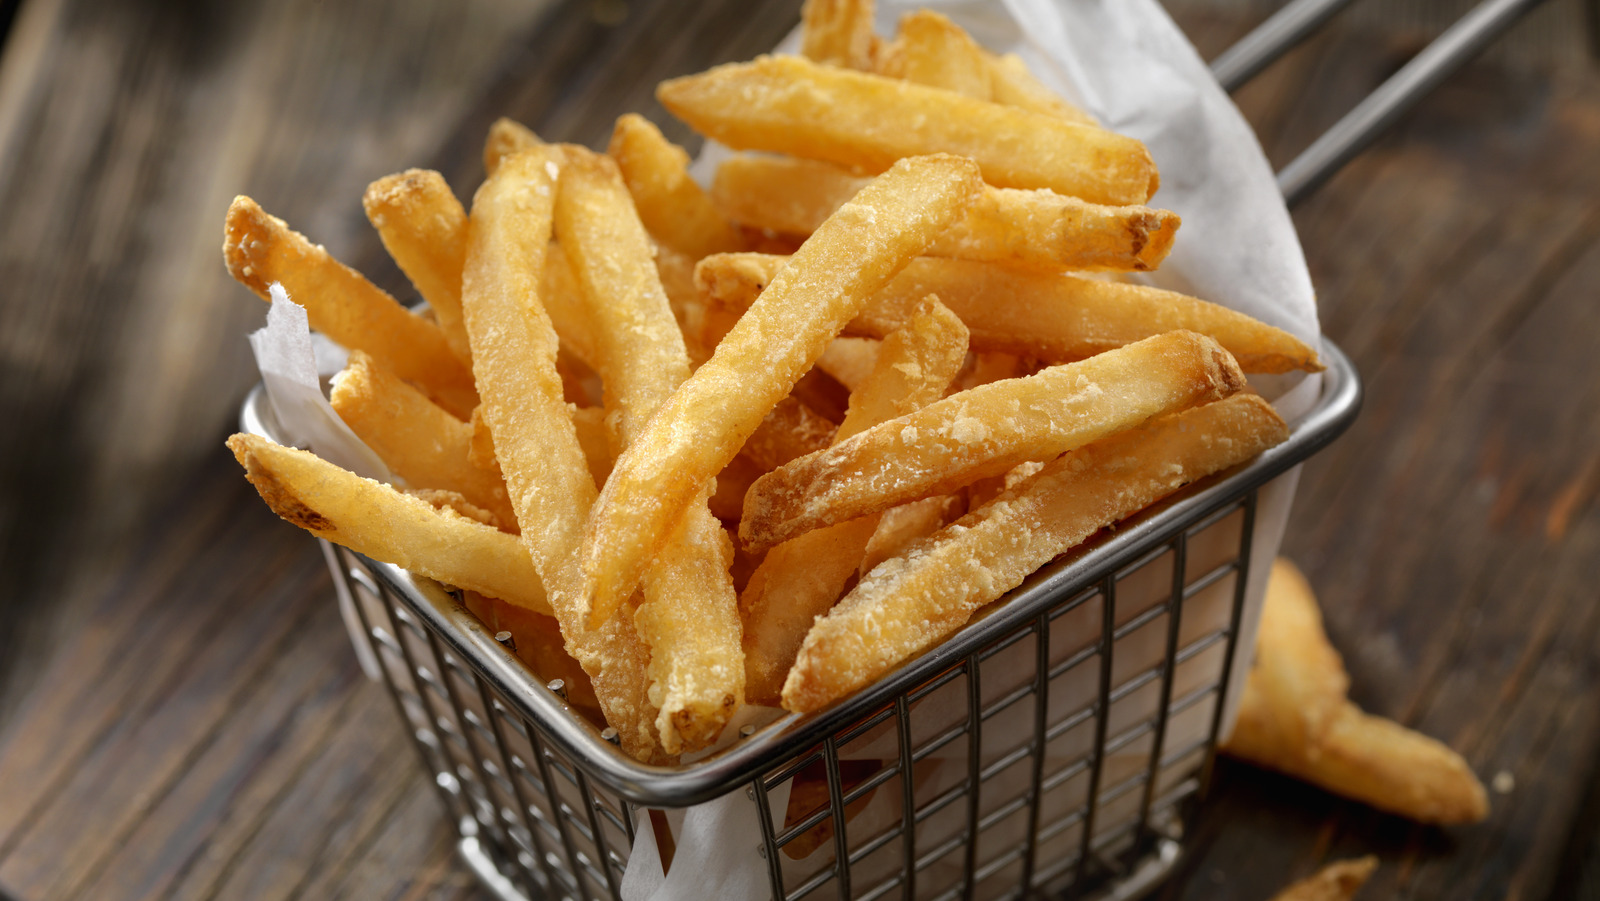 For The Crispiest French Fries, Blanch Them Before Frying